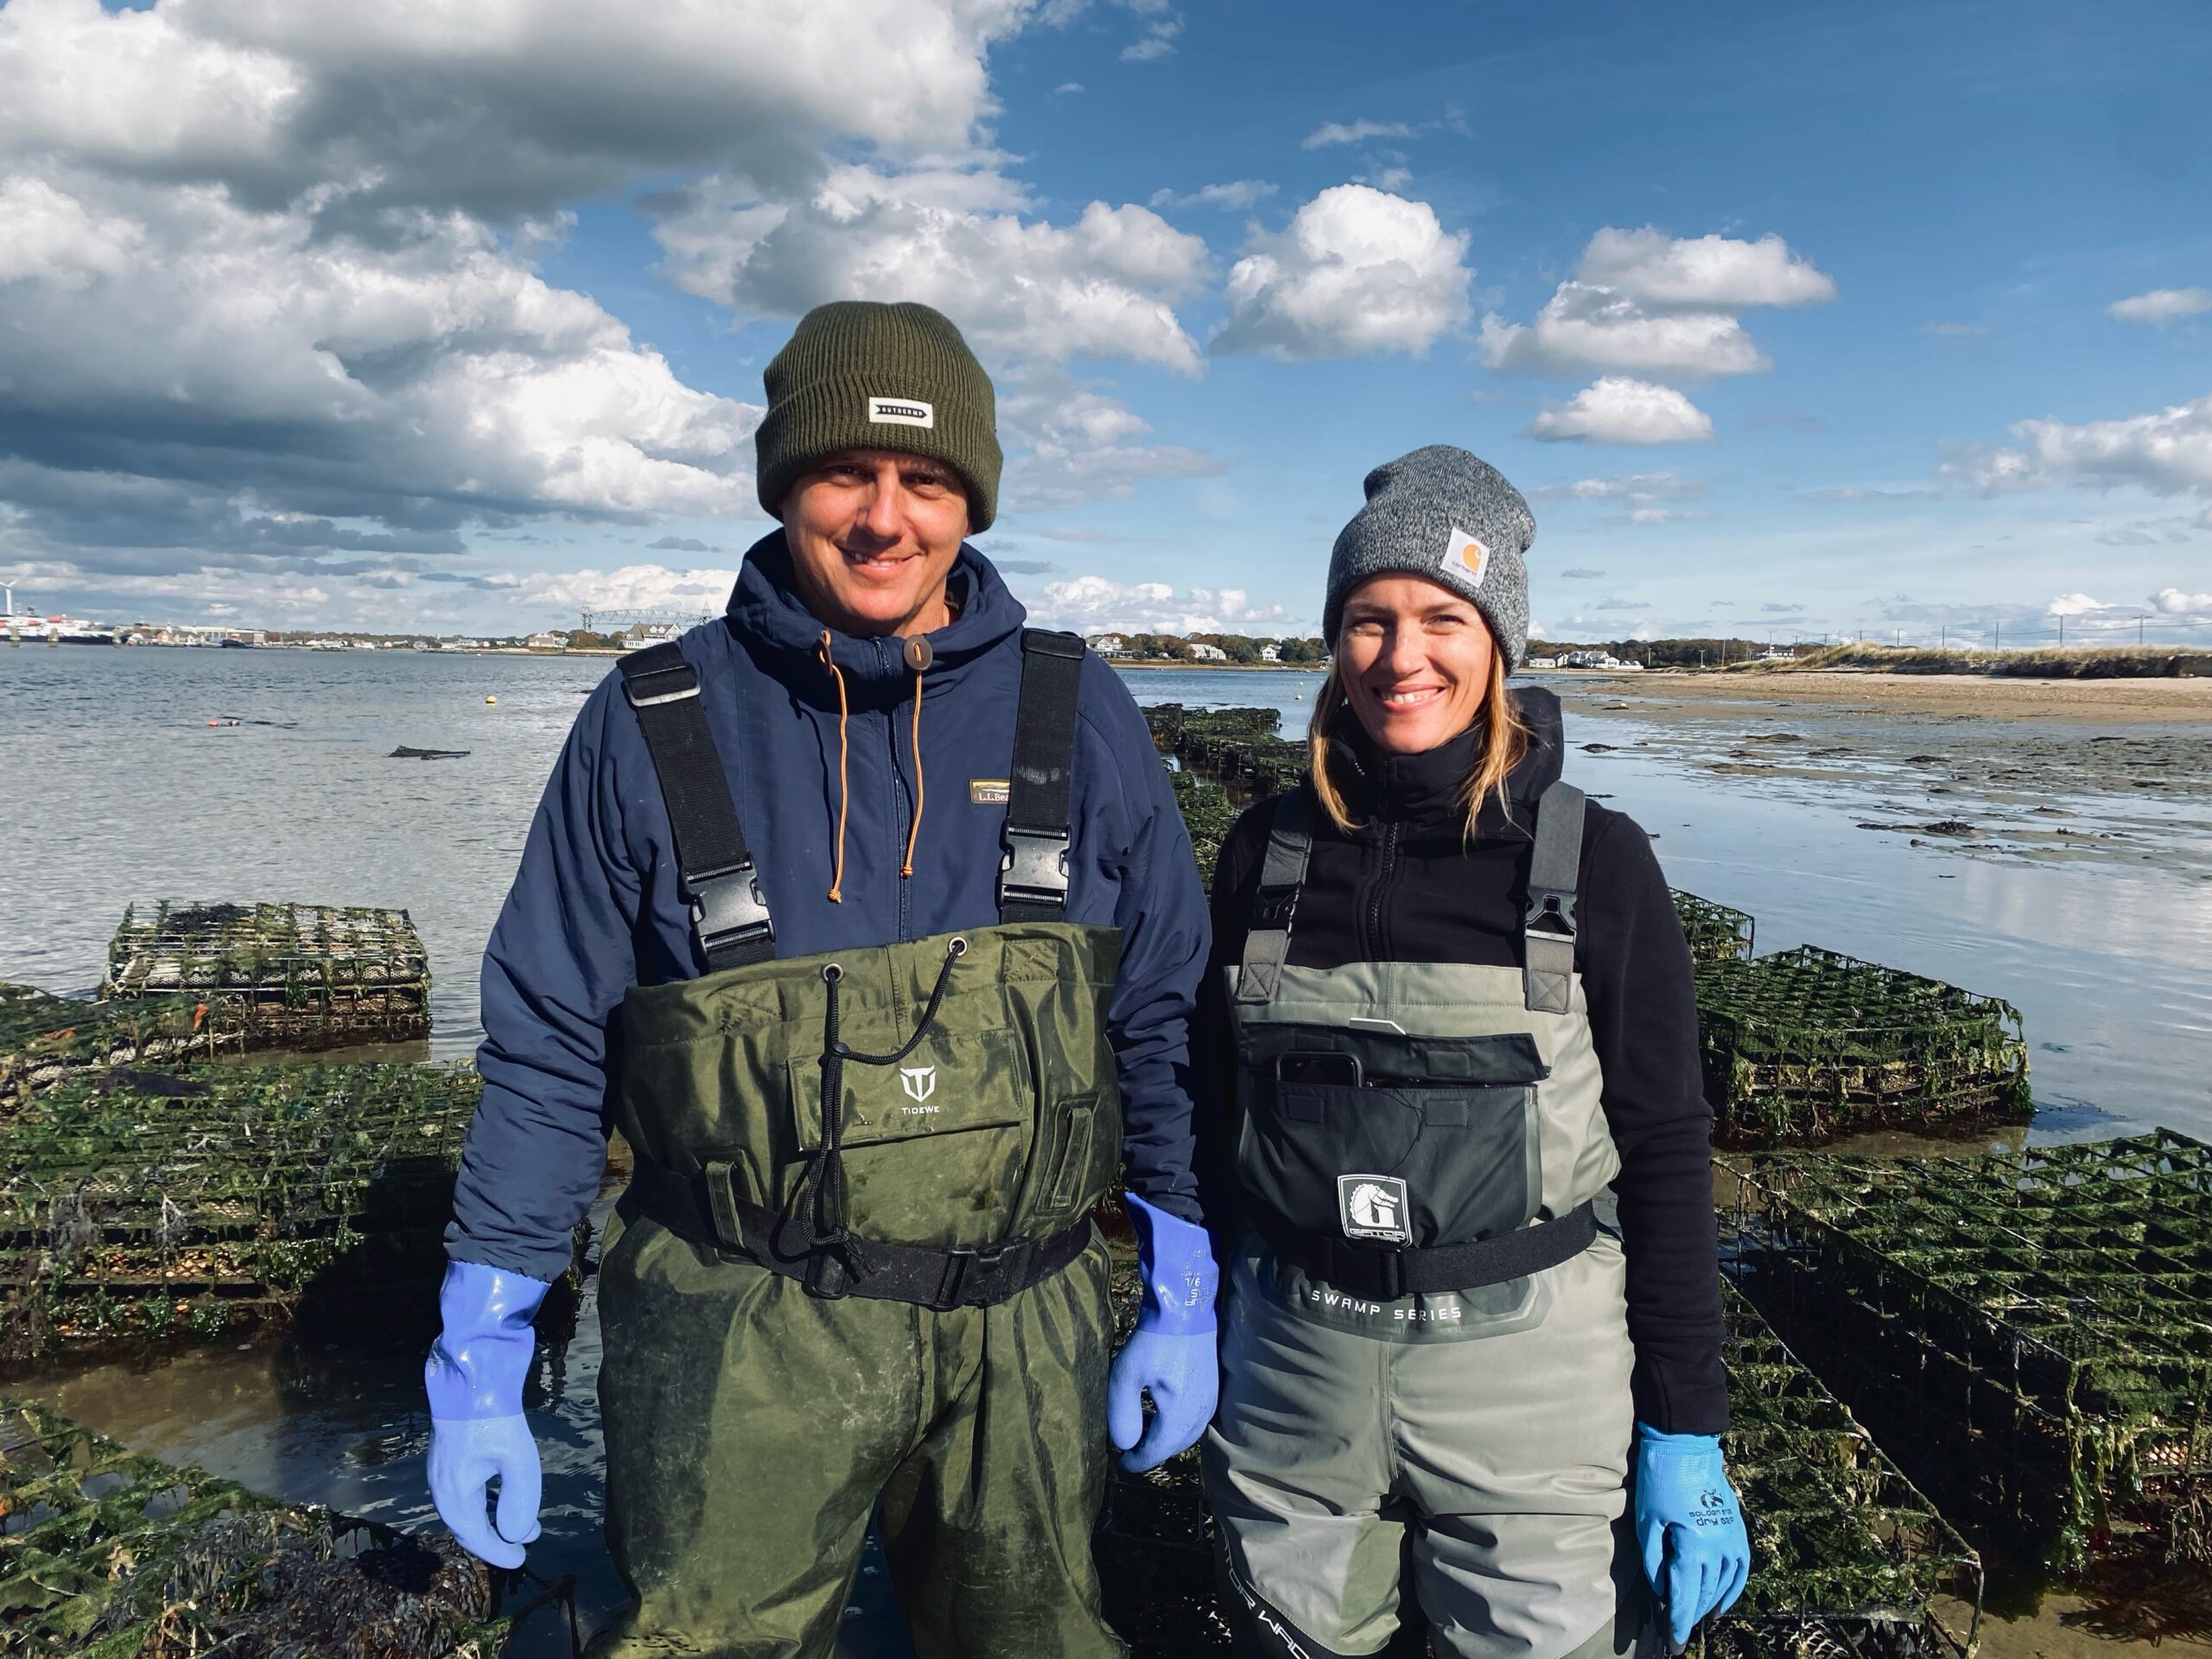 Couple strengthens fisheries in Bourne